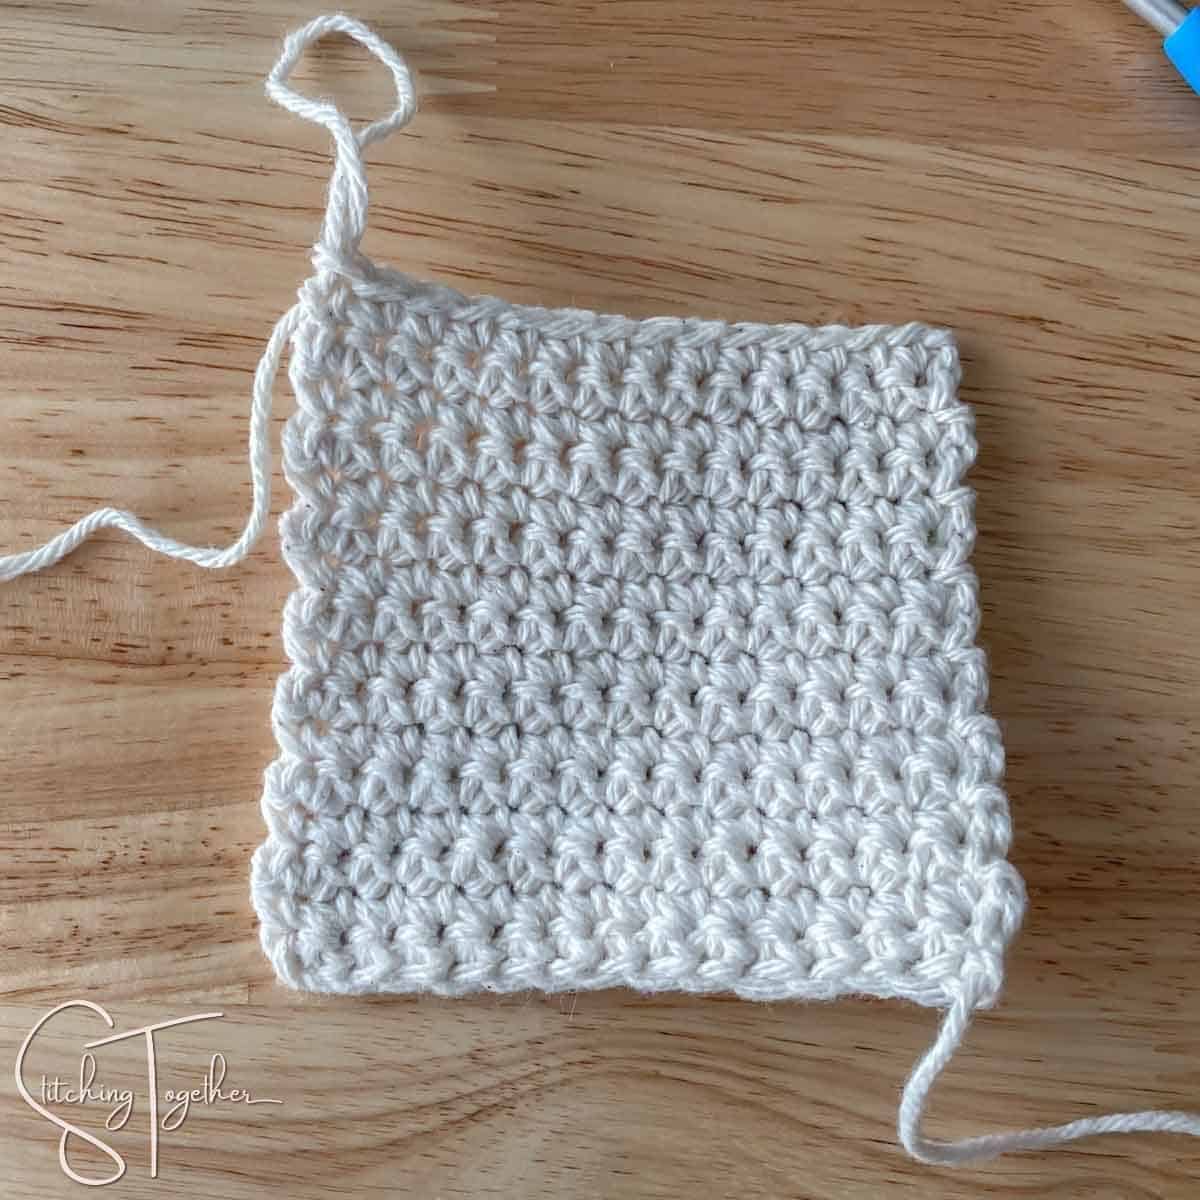 a completed single crochet square with yarn still attached